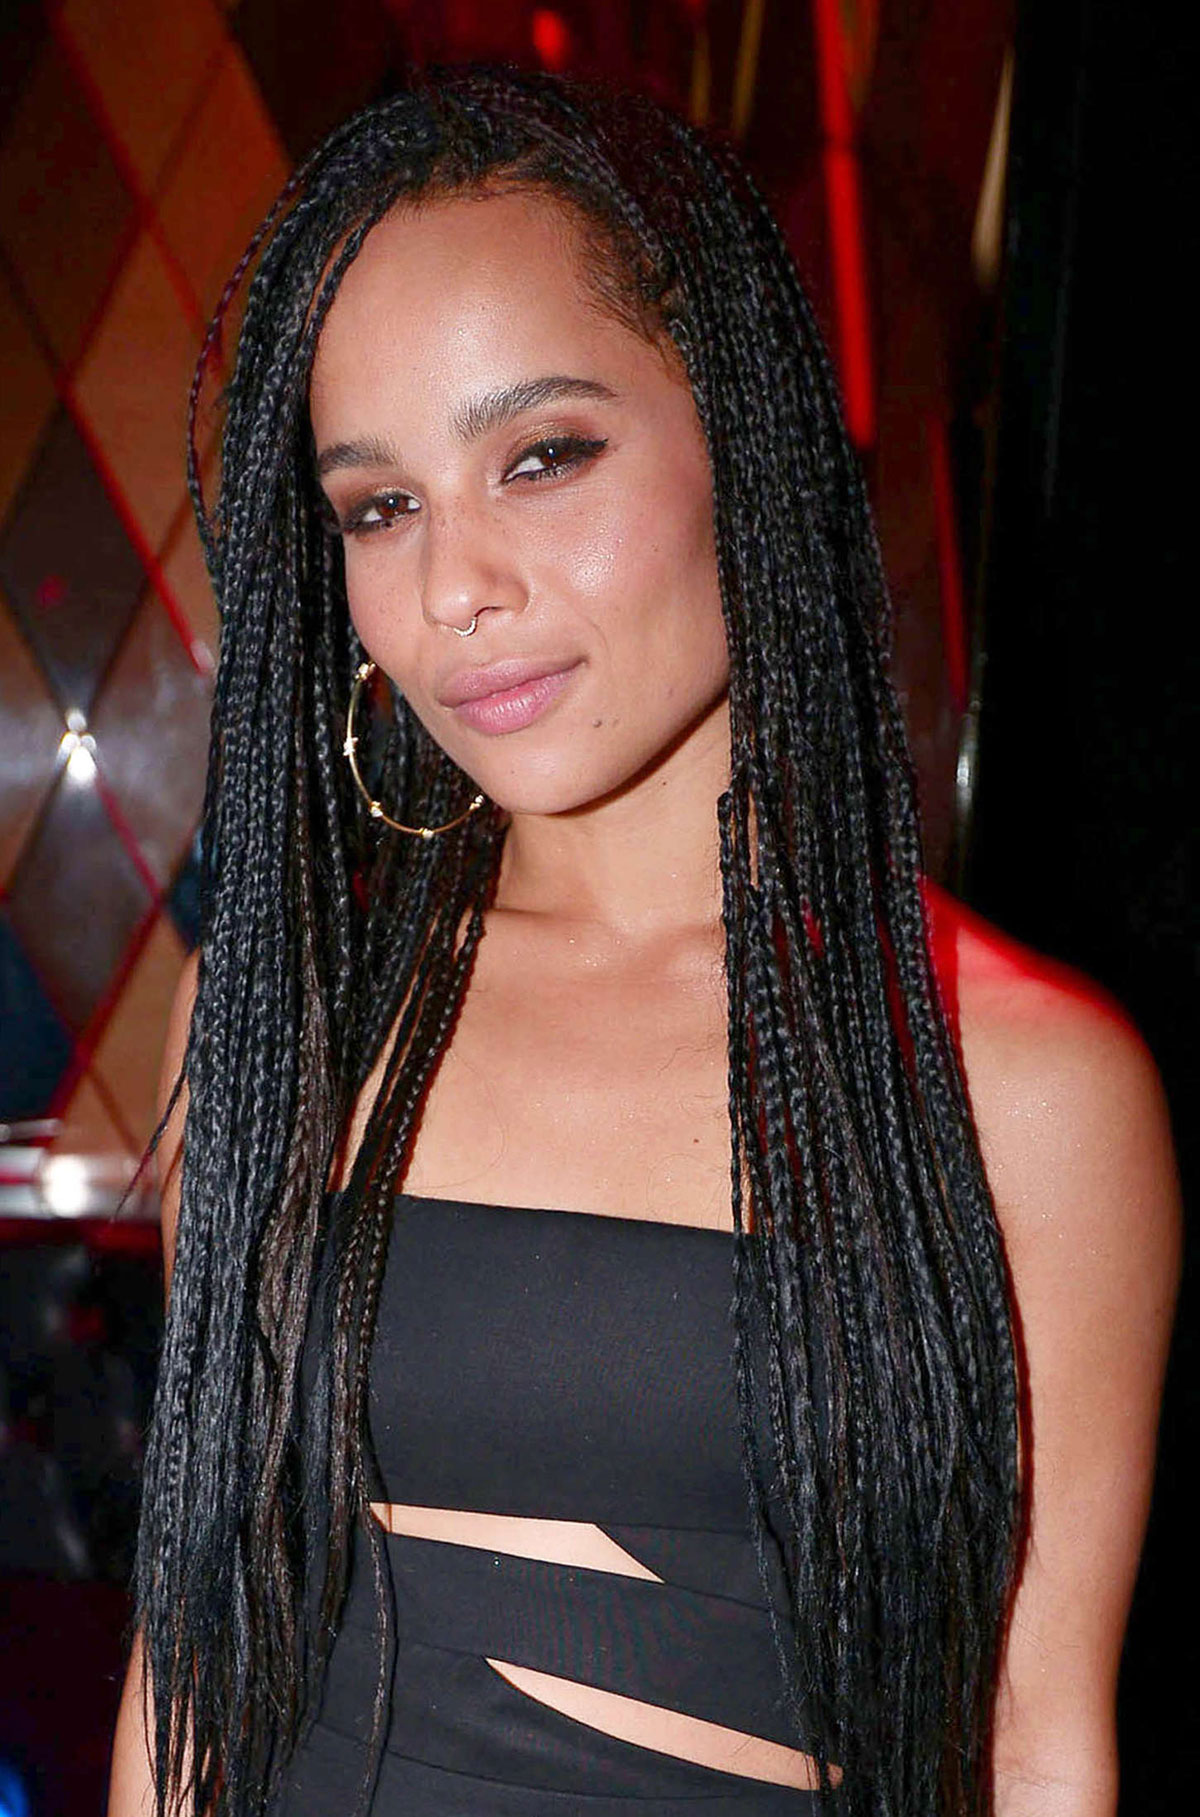 ZOE KRAVITZ at Ocean Drive Magazine Issue Launch Party in Miami ...